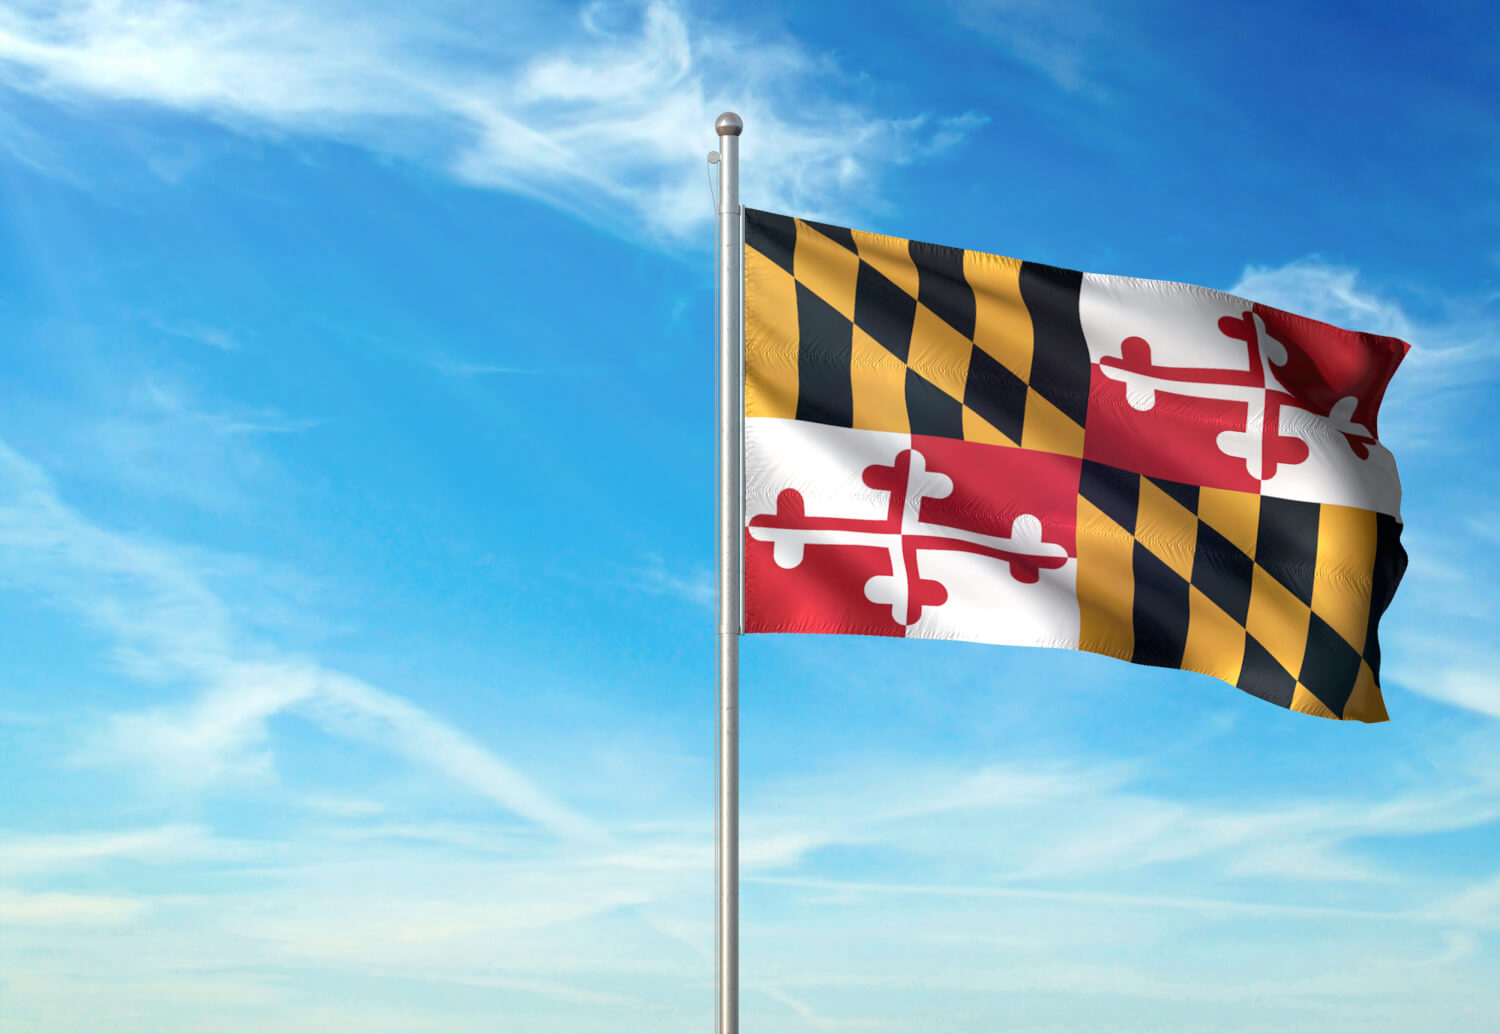 Maryland flag flying high in Chestertown, Md.